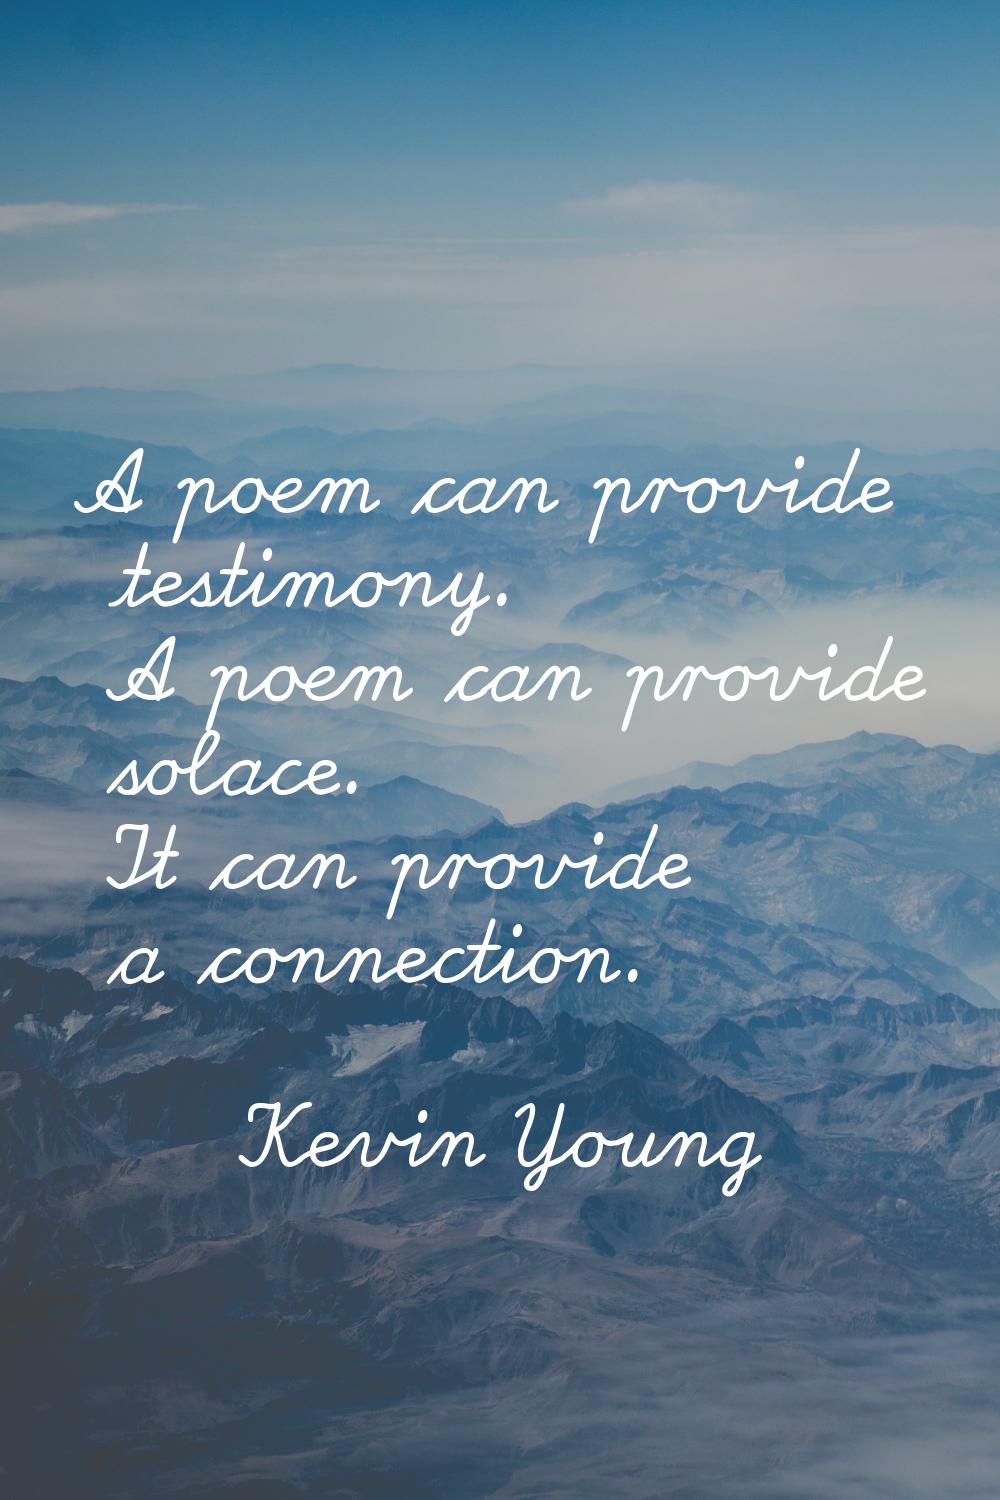 A poem can provide testimony. A poem can provide solace. It can provide a connection.